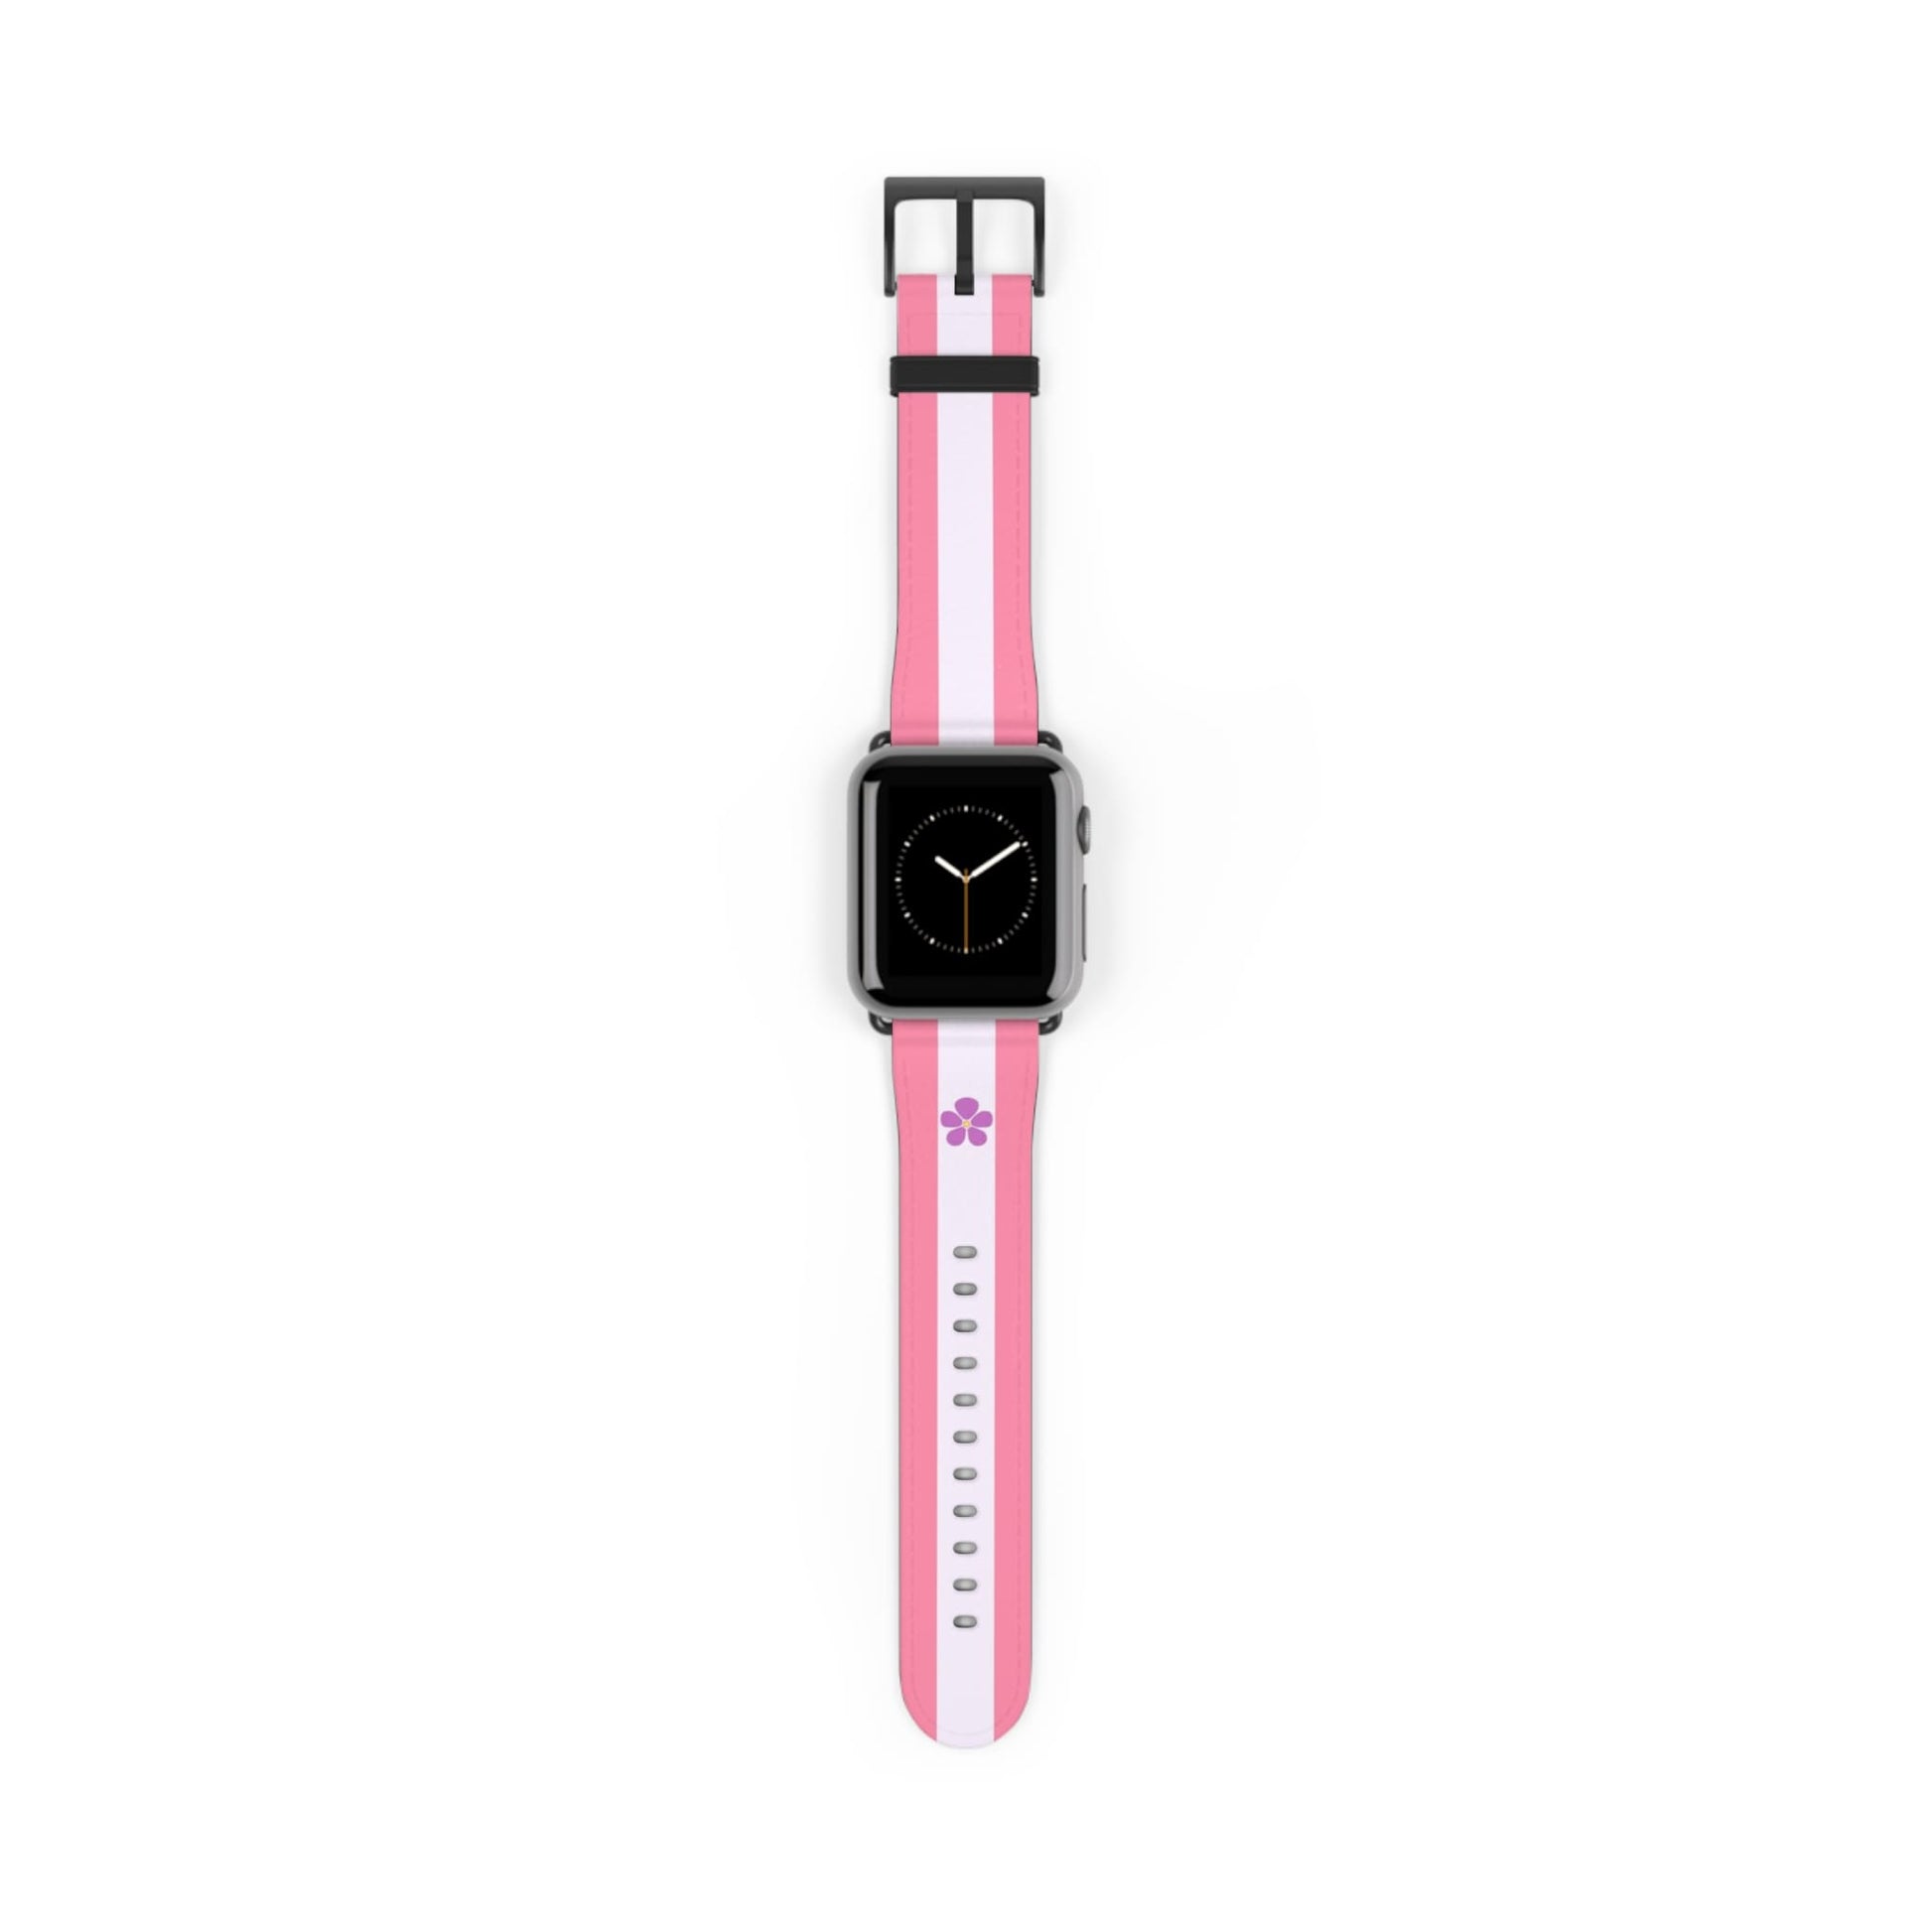 sapphic watch band for Apple iwatch, black